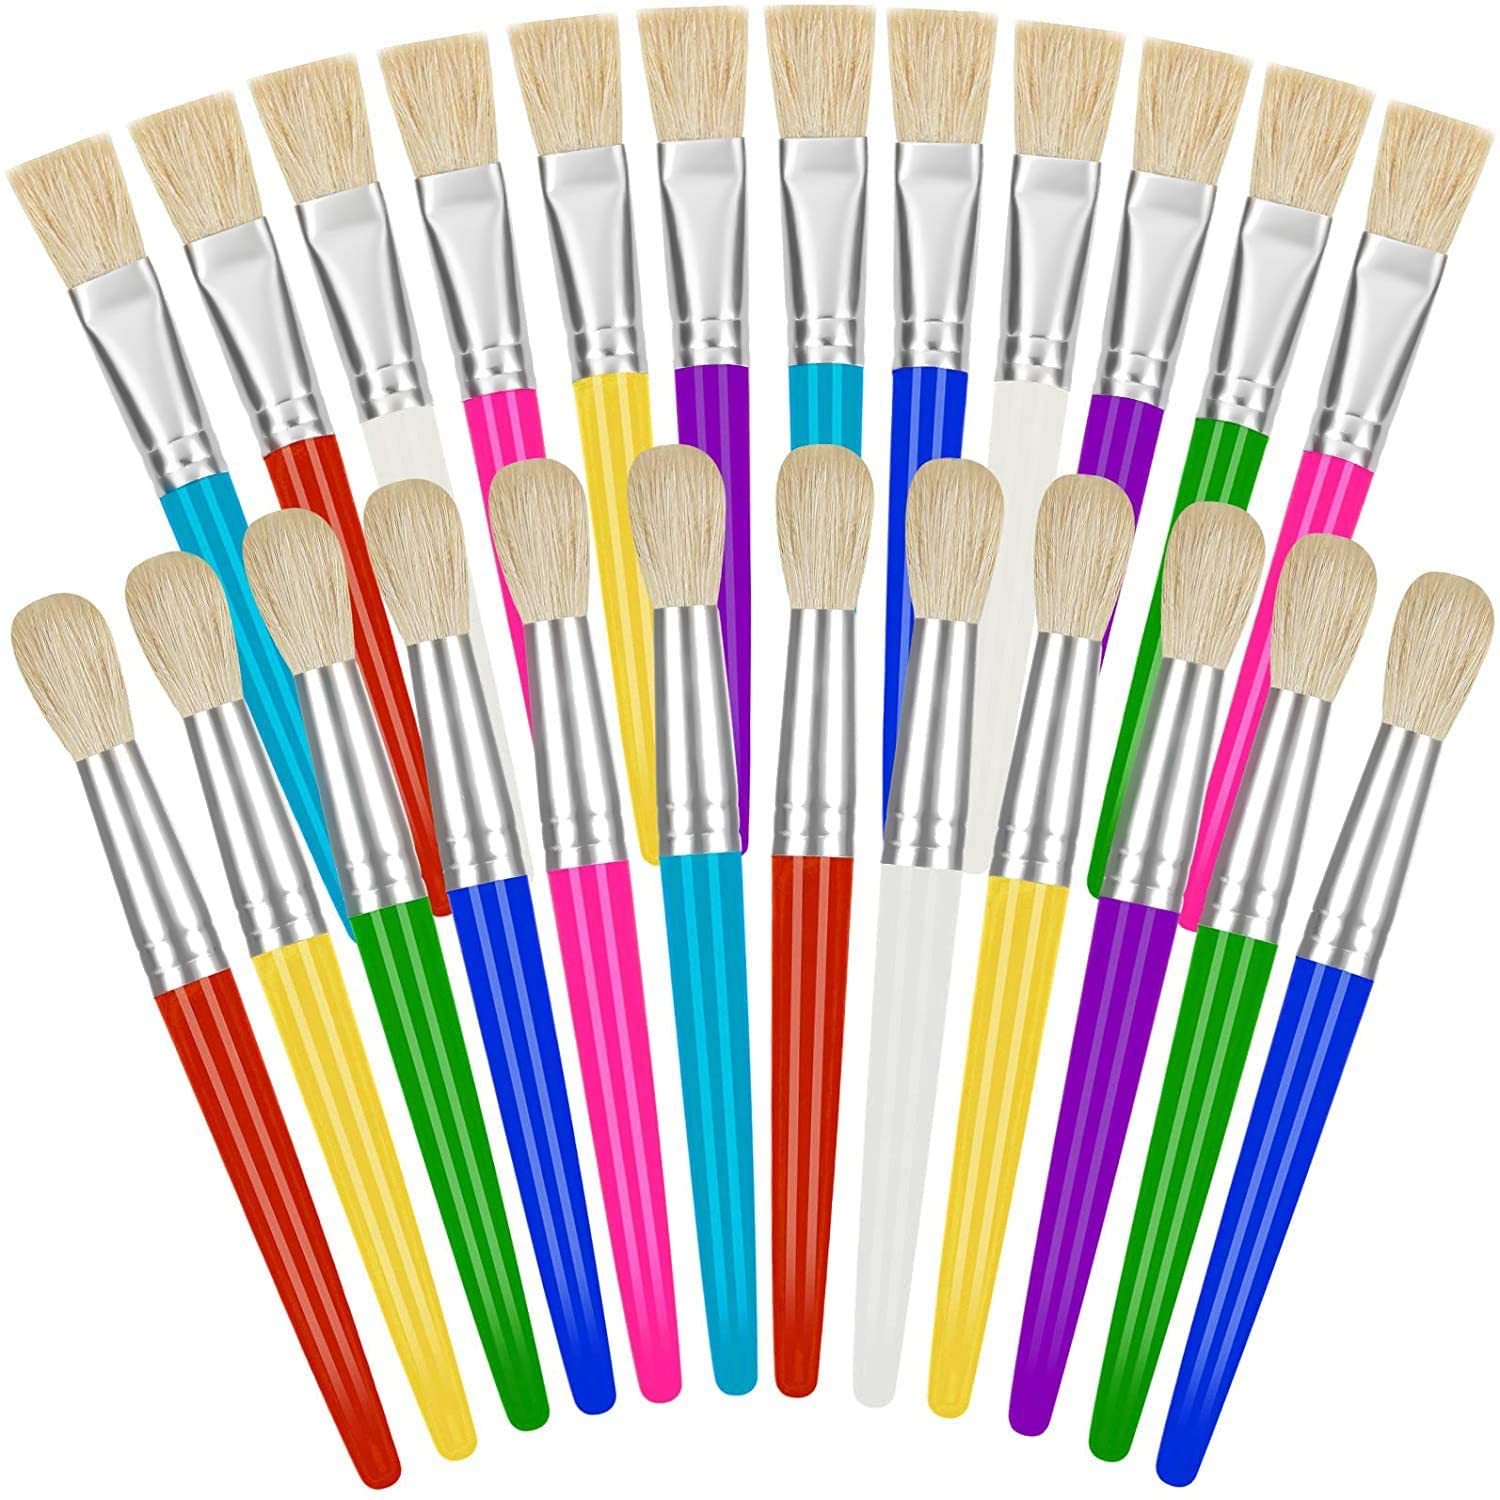 Toddler Paint Brushes 24 Pack, Hog Bristle Round and Flat Preschool Paint Brushes for Washable Paint Acrylic Paint, Size: Large